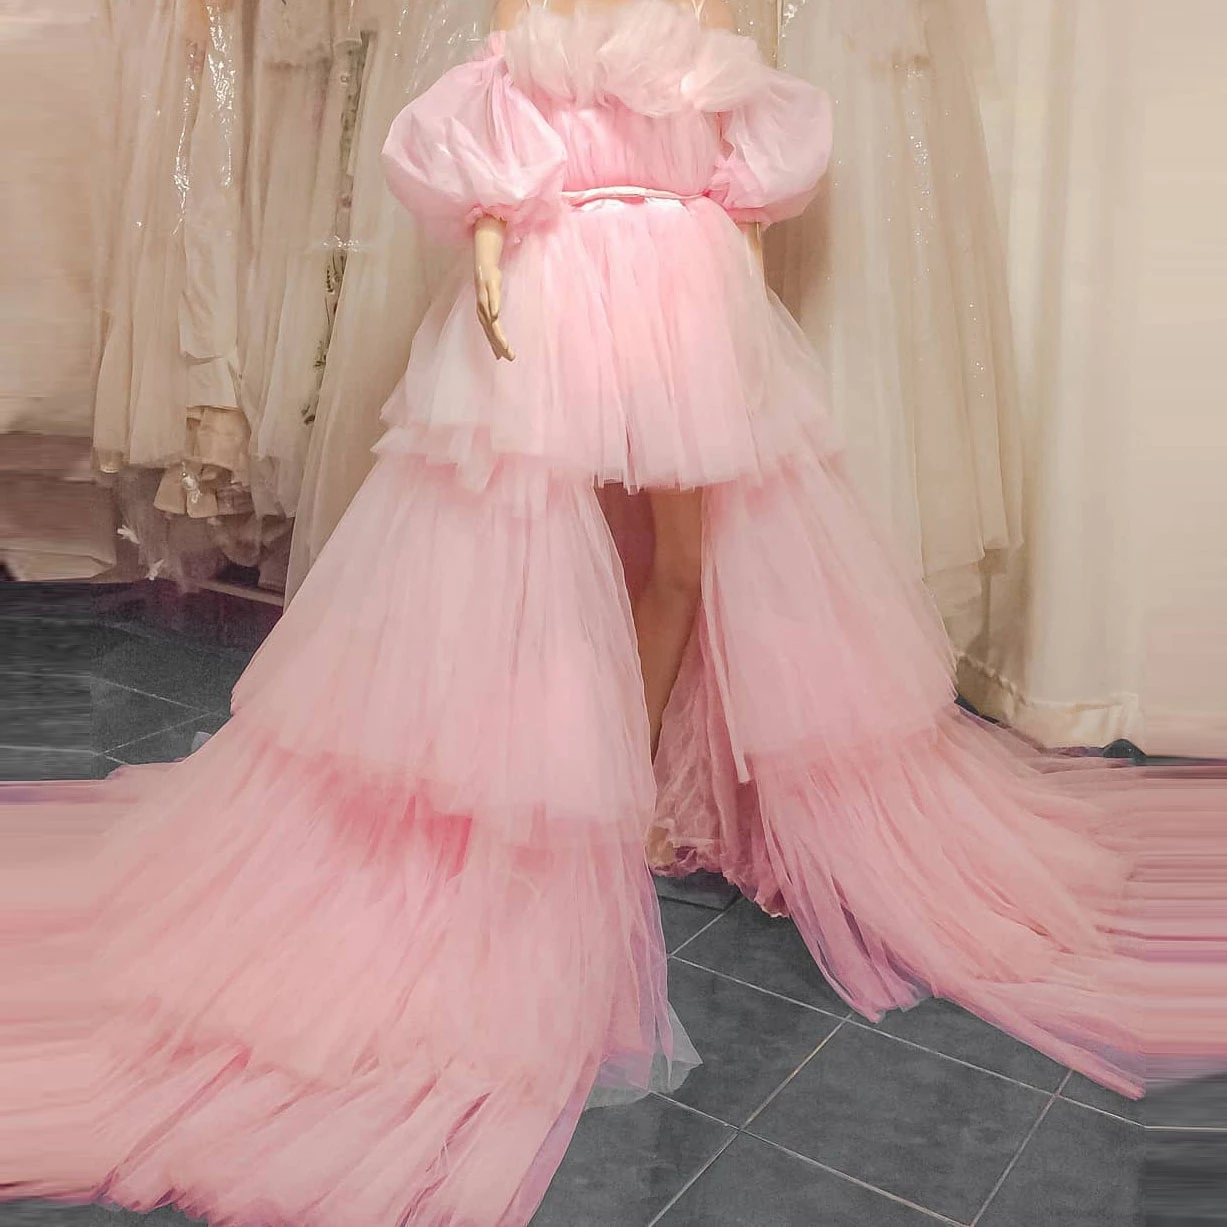 

Exquisite Pink Prom Dress Ruffle Off-The-Shoulder Bubble Sleeve High-Low Sweep Train Criss-ross Lace Up Back Event Dresses